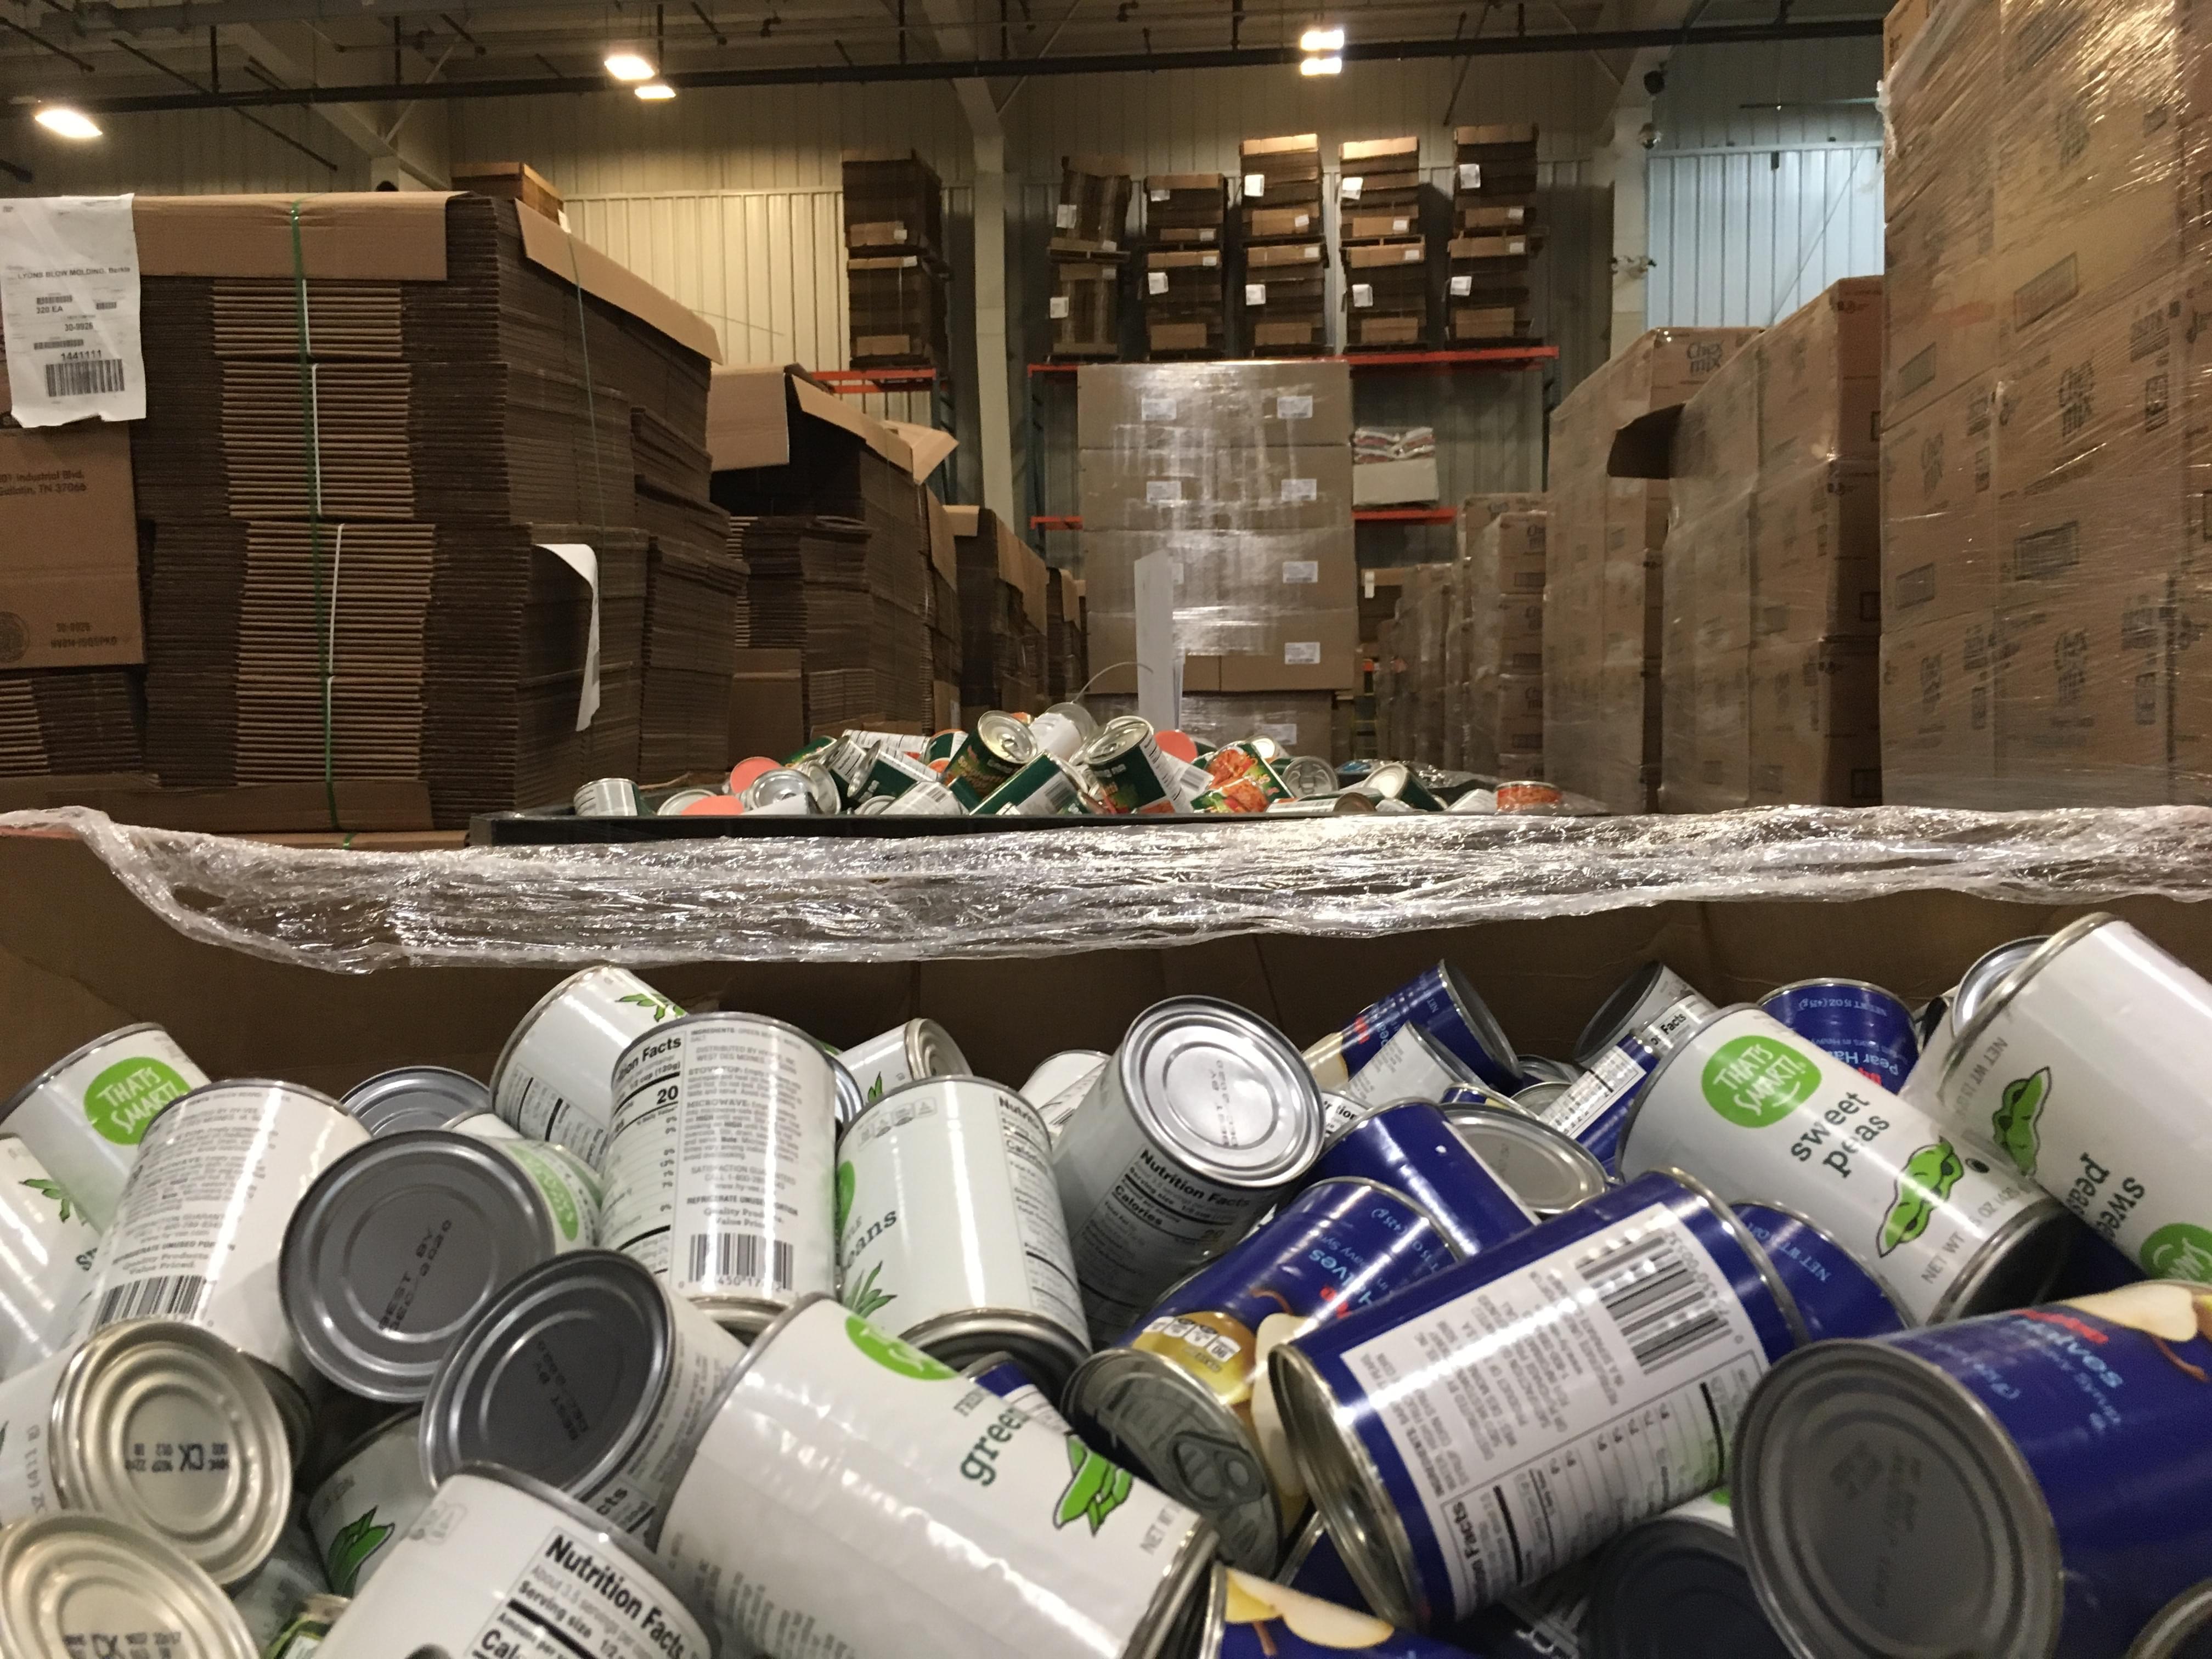 Bins of food wait to be sorted at Harvesters' warehouse in Kansas City, Missouri.